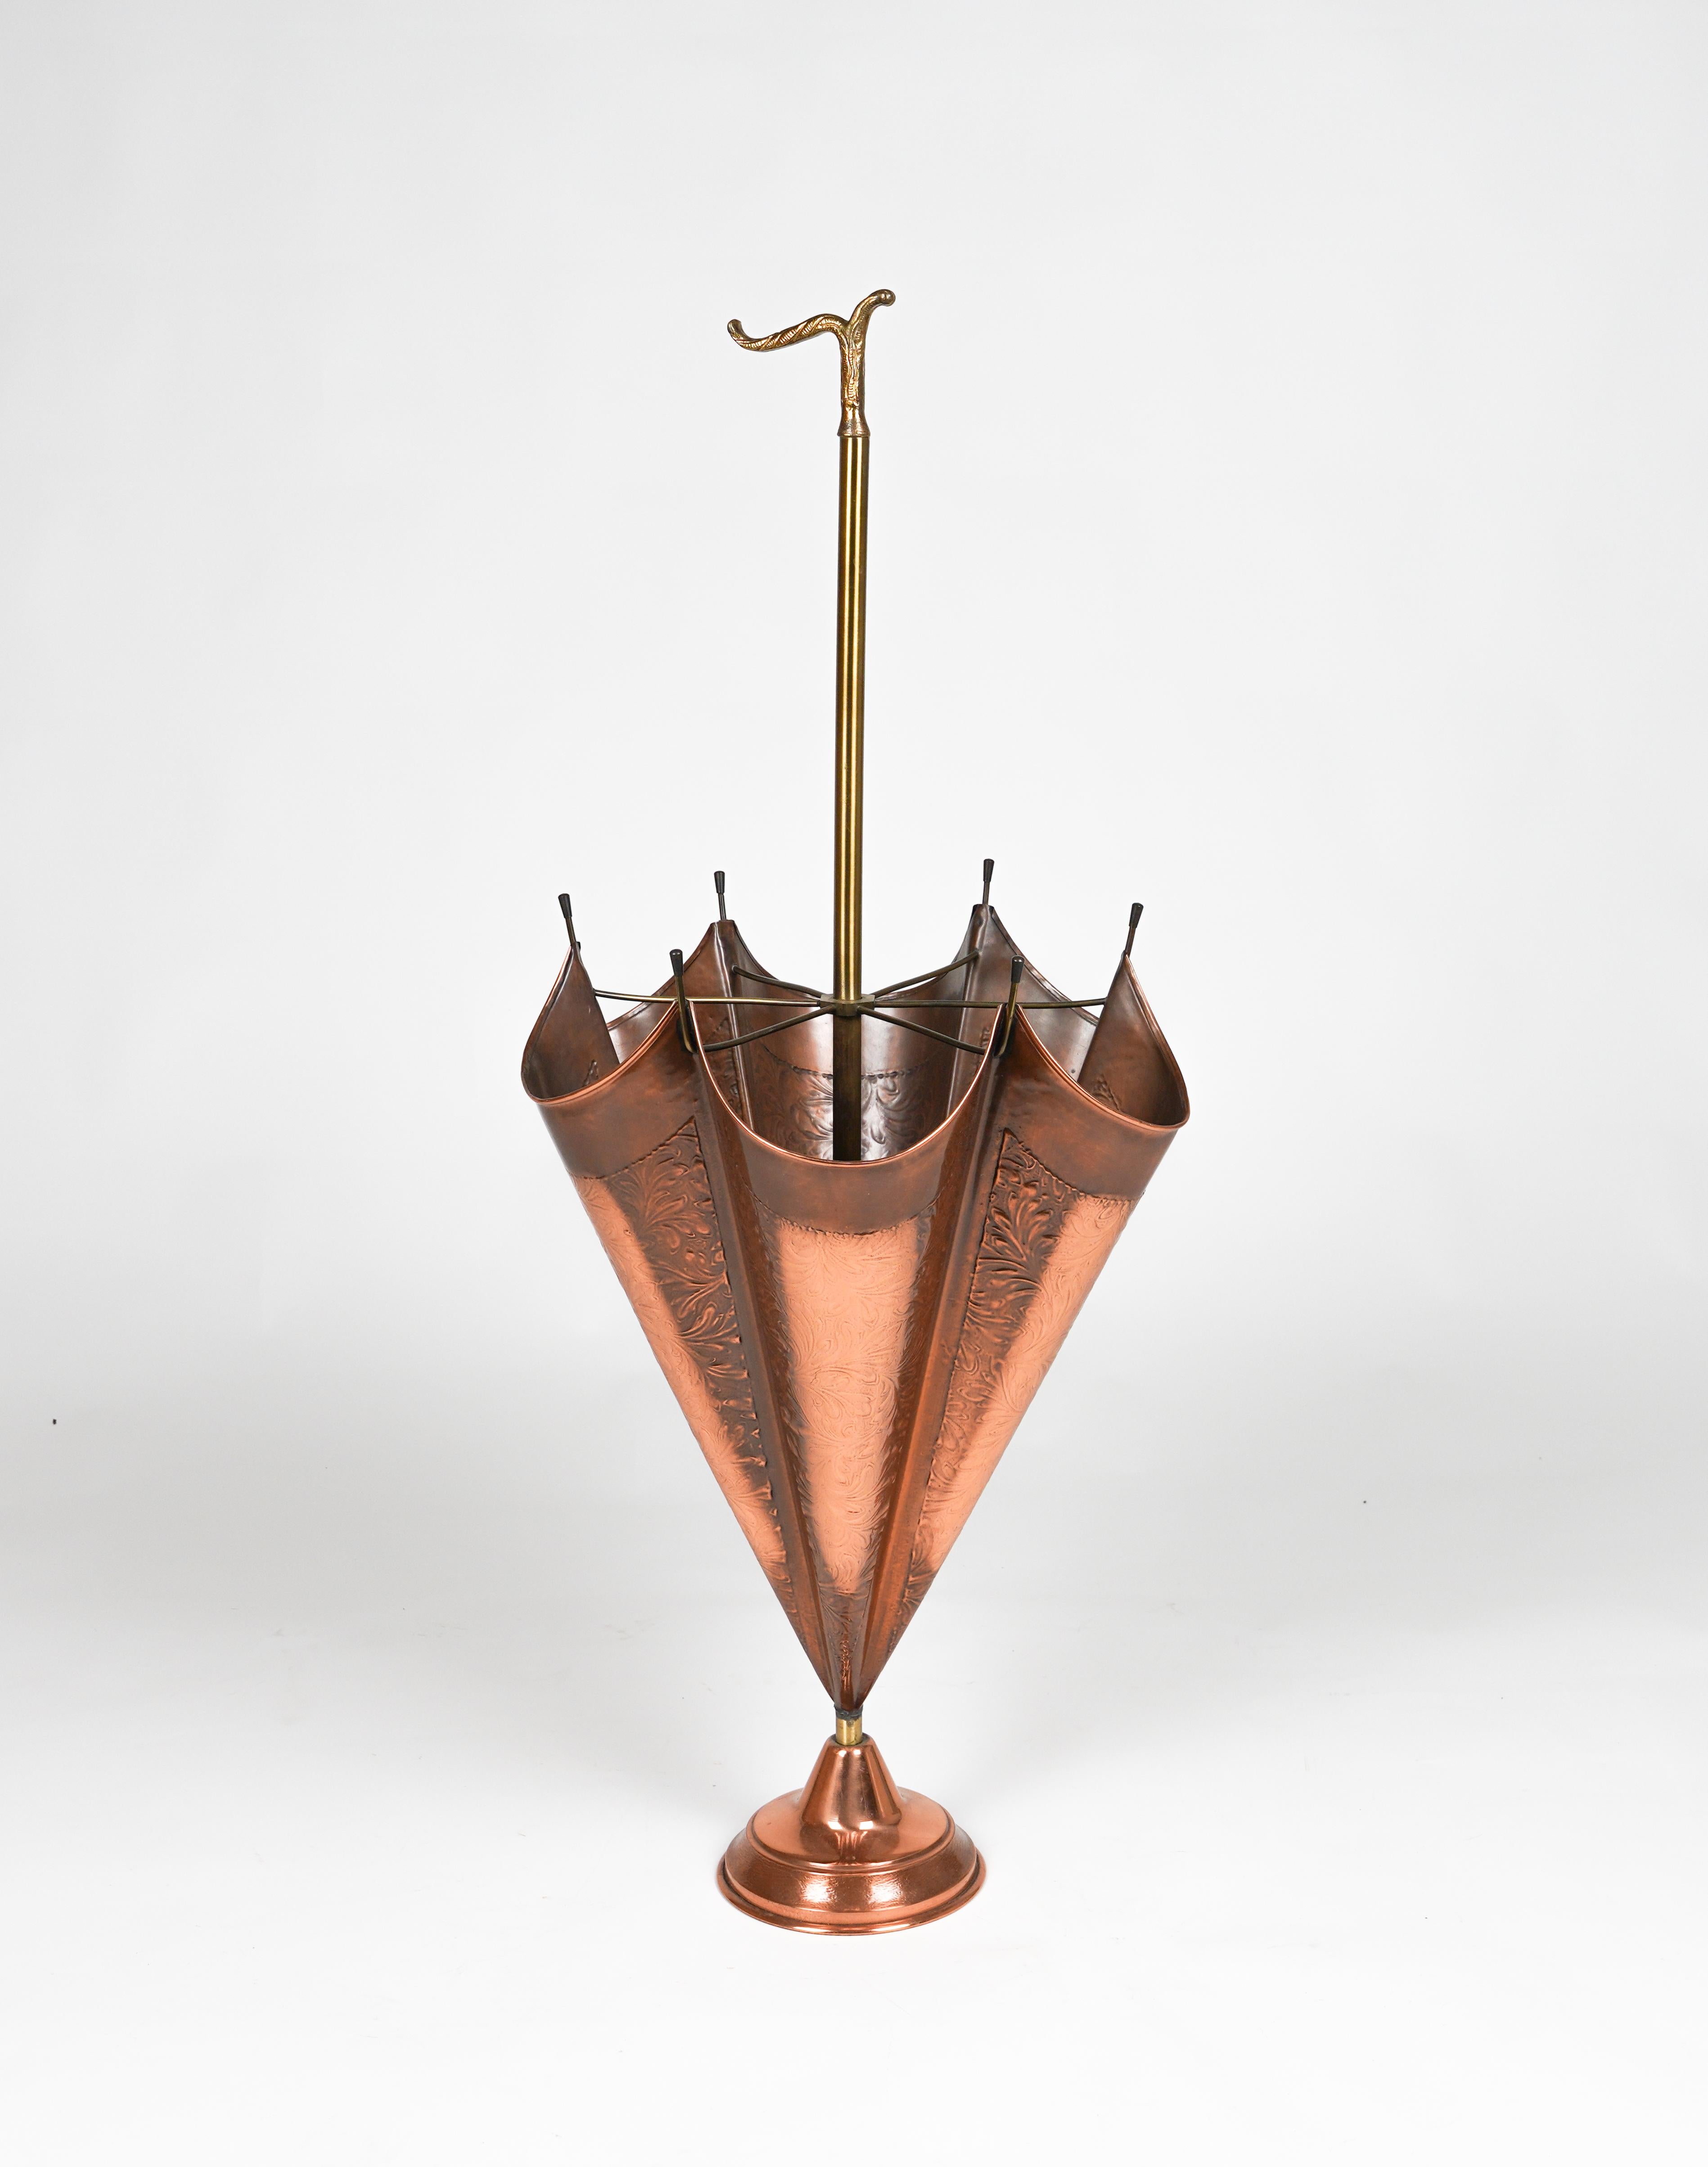 Italian Midcentury Umbrella Stand in Copper and Brass, Italy 1970s For Sale